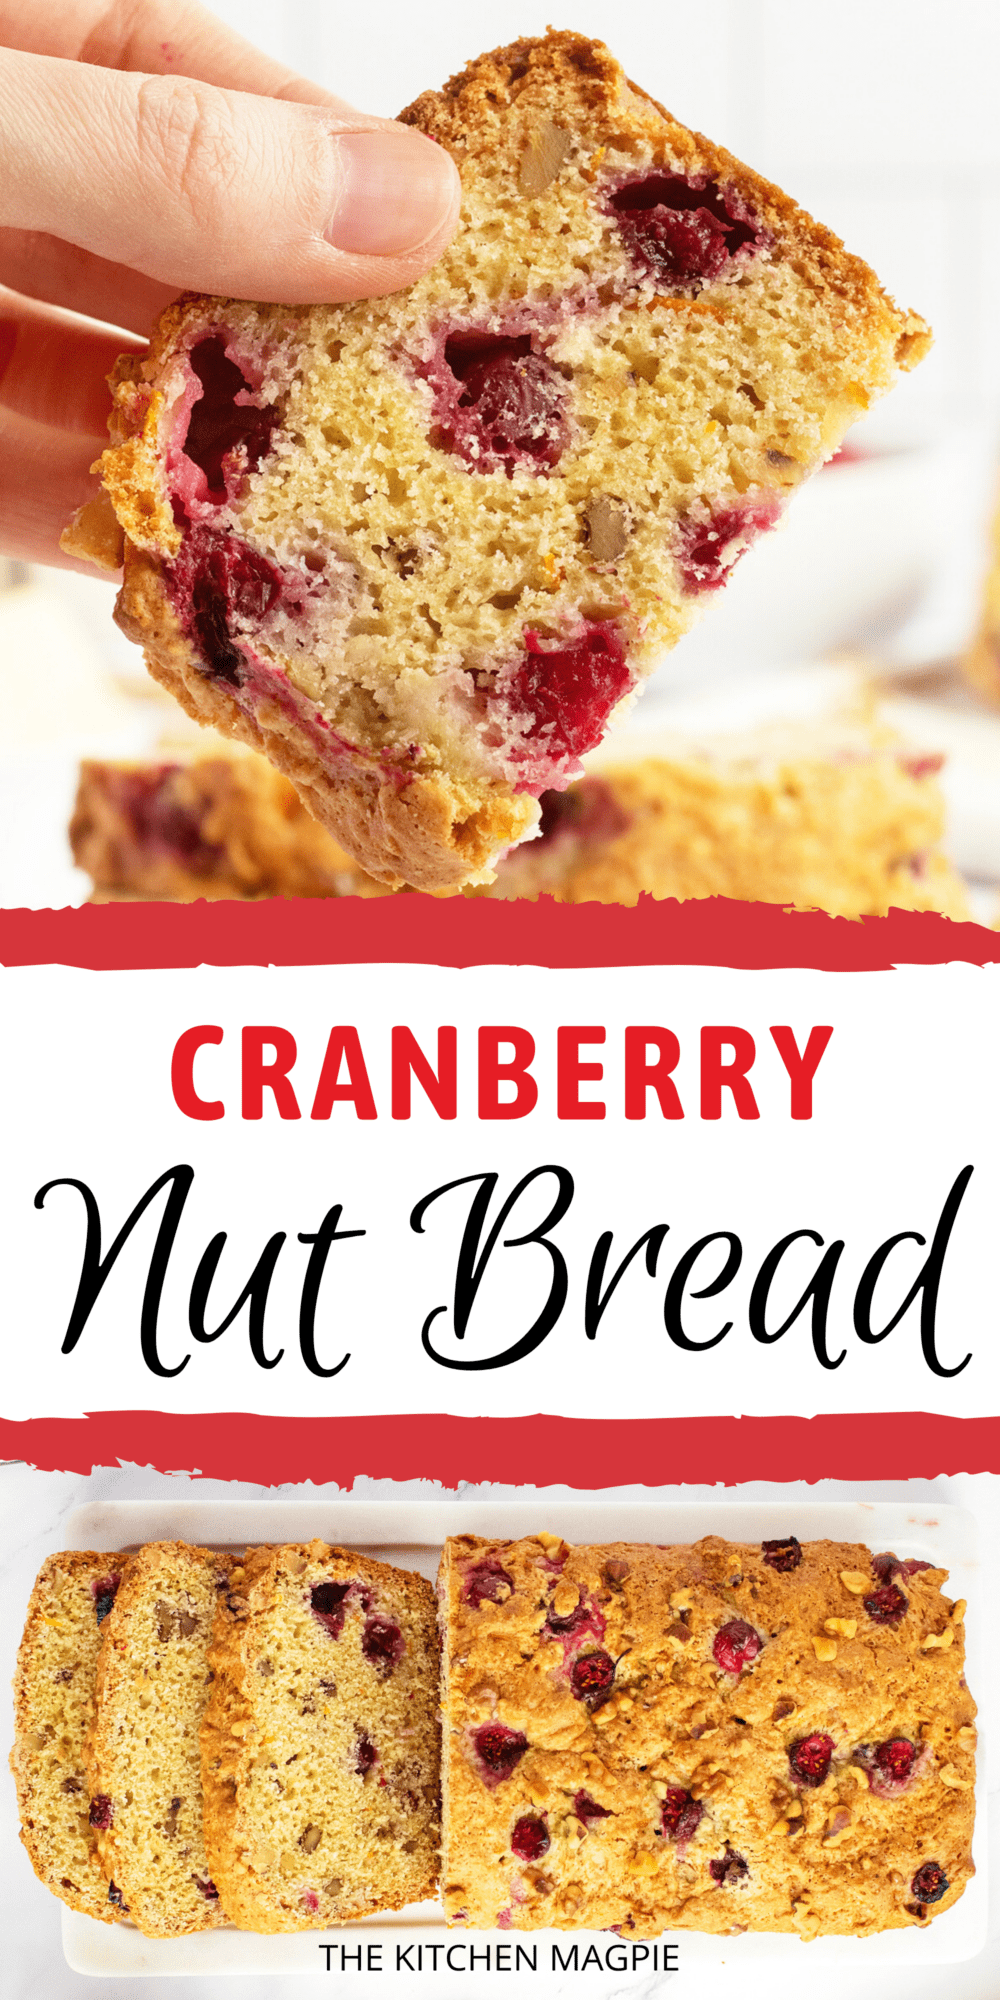 Packed with nuts, cranberries, and citrus flavors, this quick bread recipe is a great breakfast or dense snack.